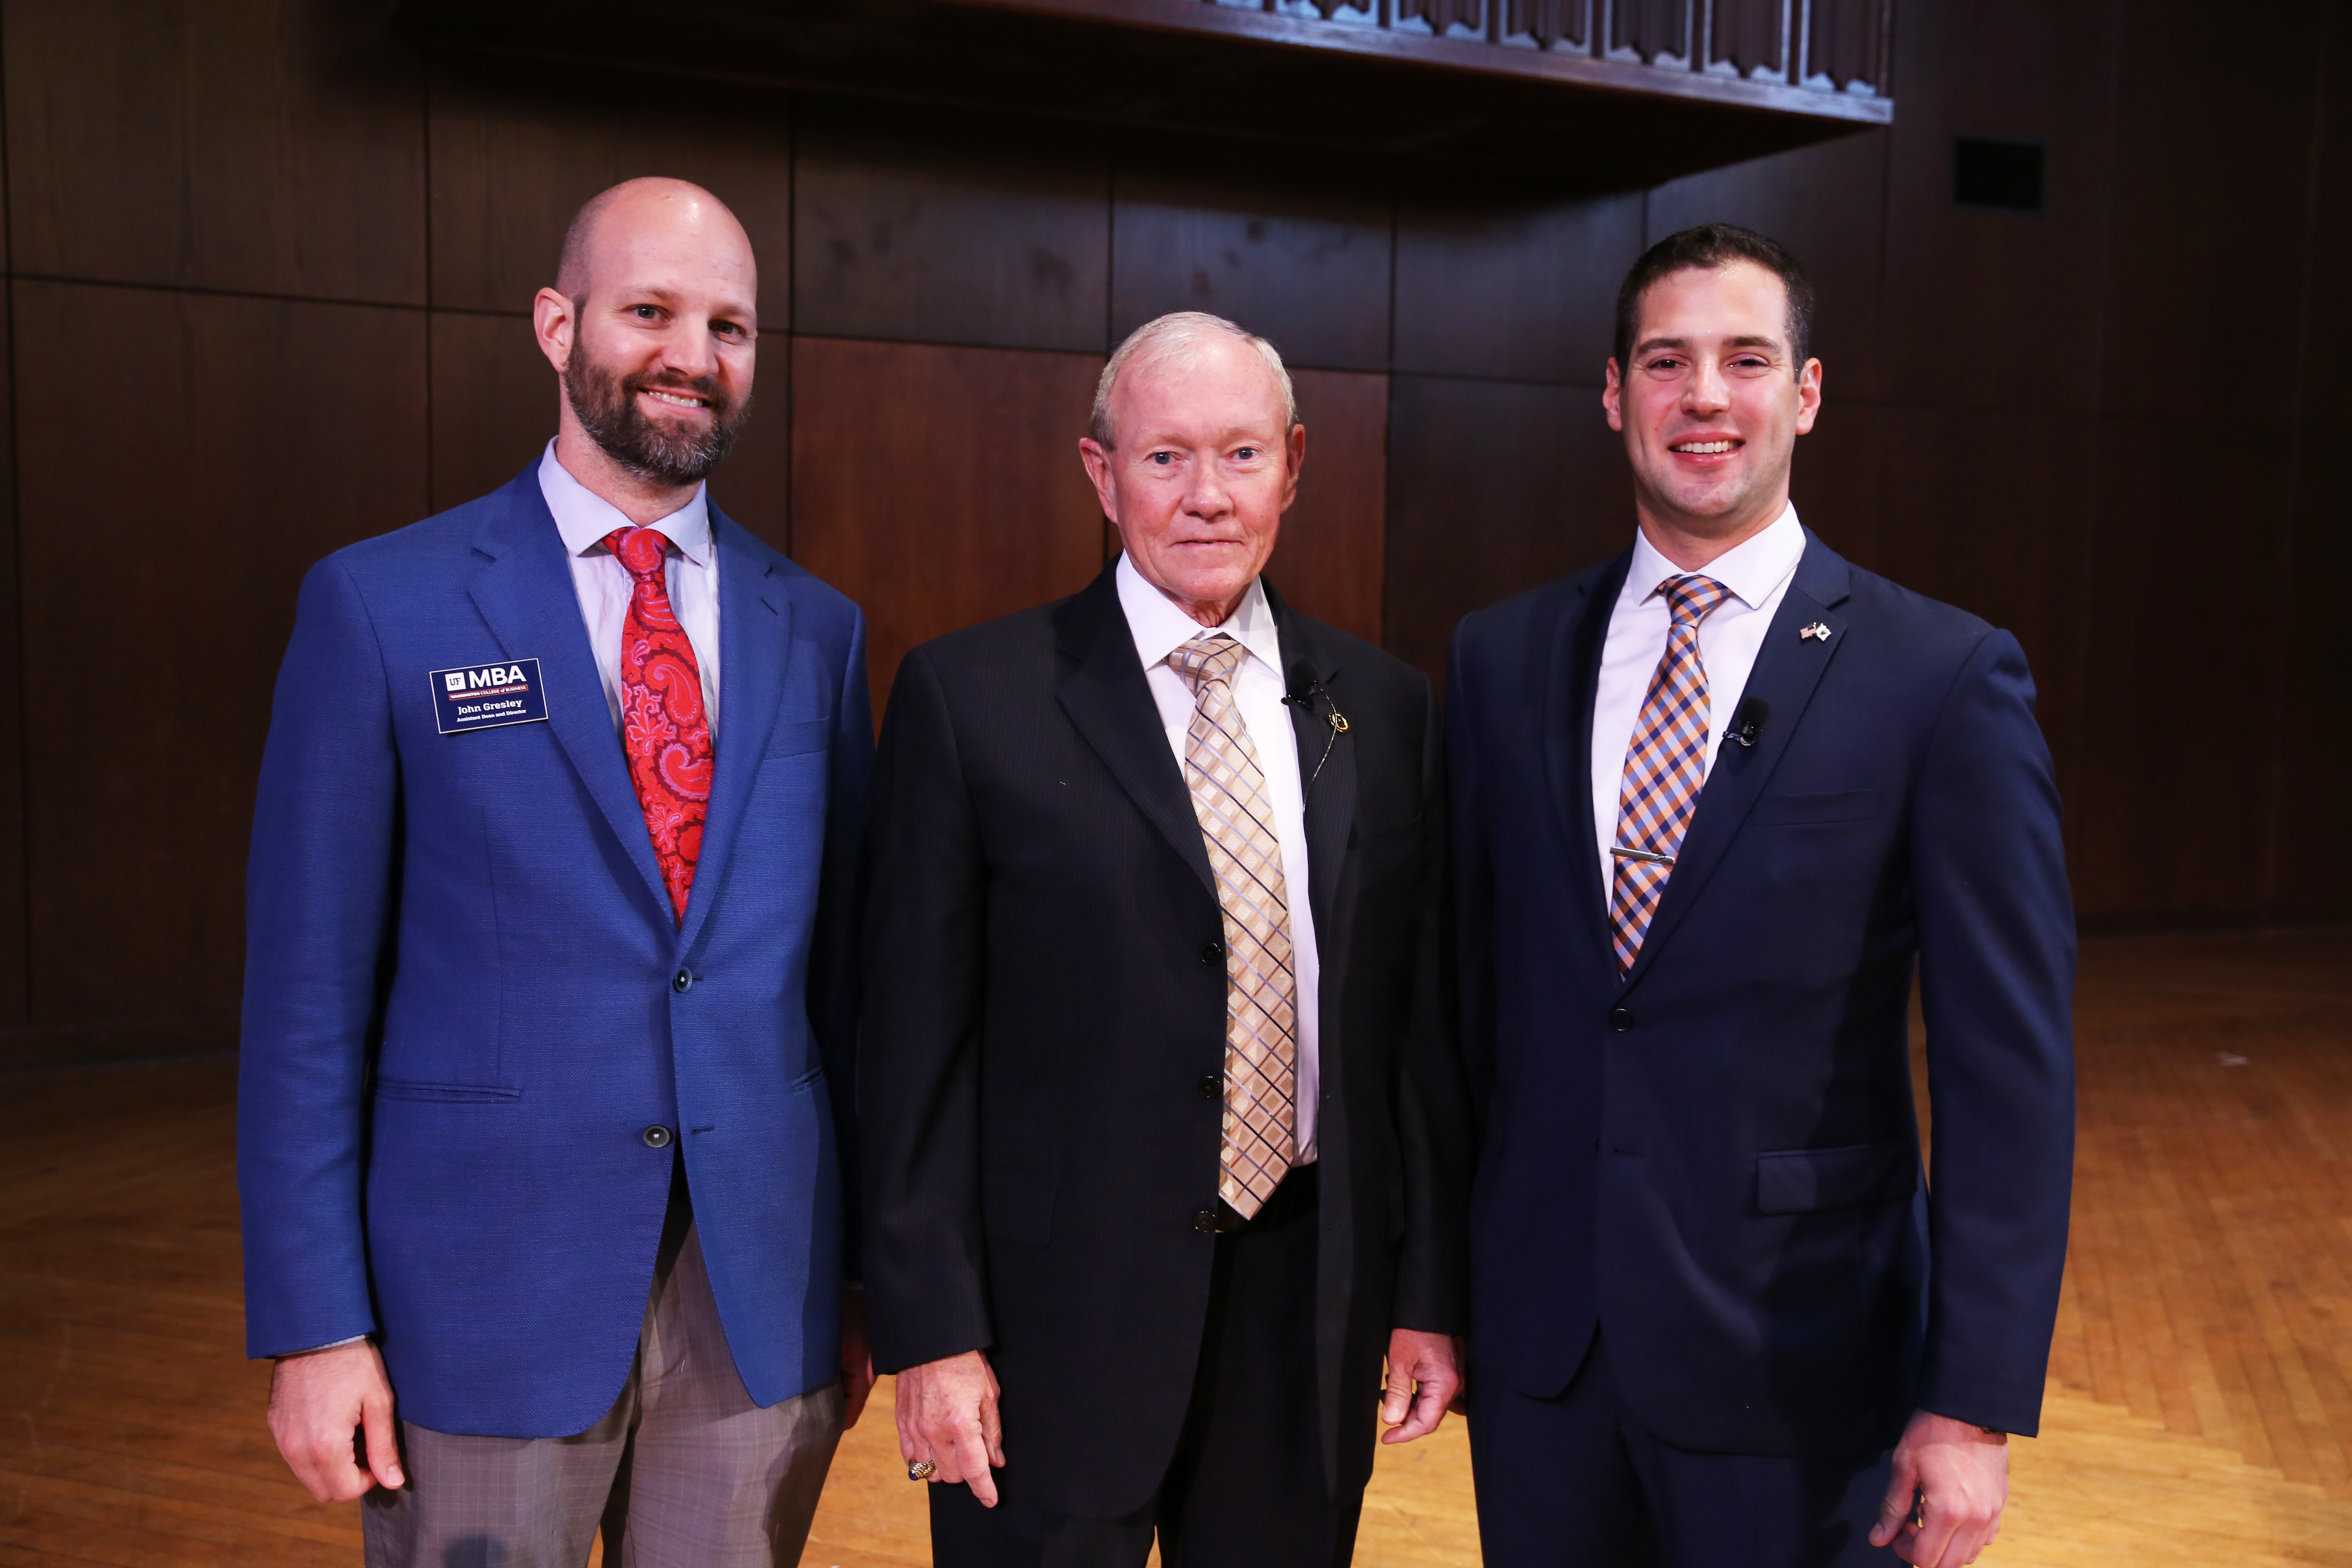 From left: Assistant Dean and Director of UF MBA John Gresley, General Martin E. Dempsey, U.S. Army, Retired, and UF MBA student Chris Salinas.